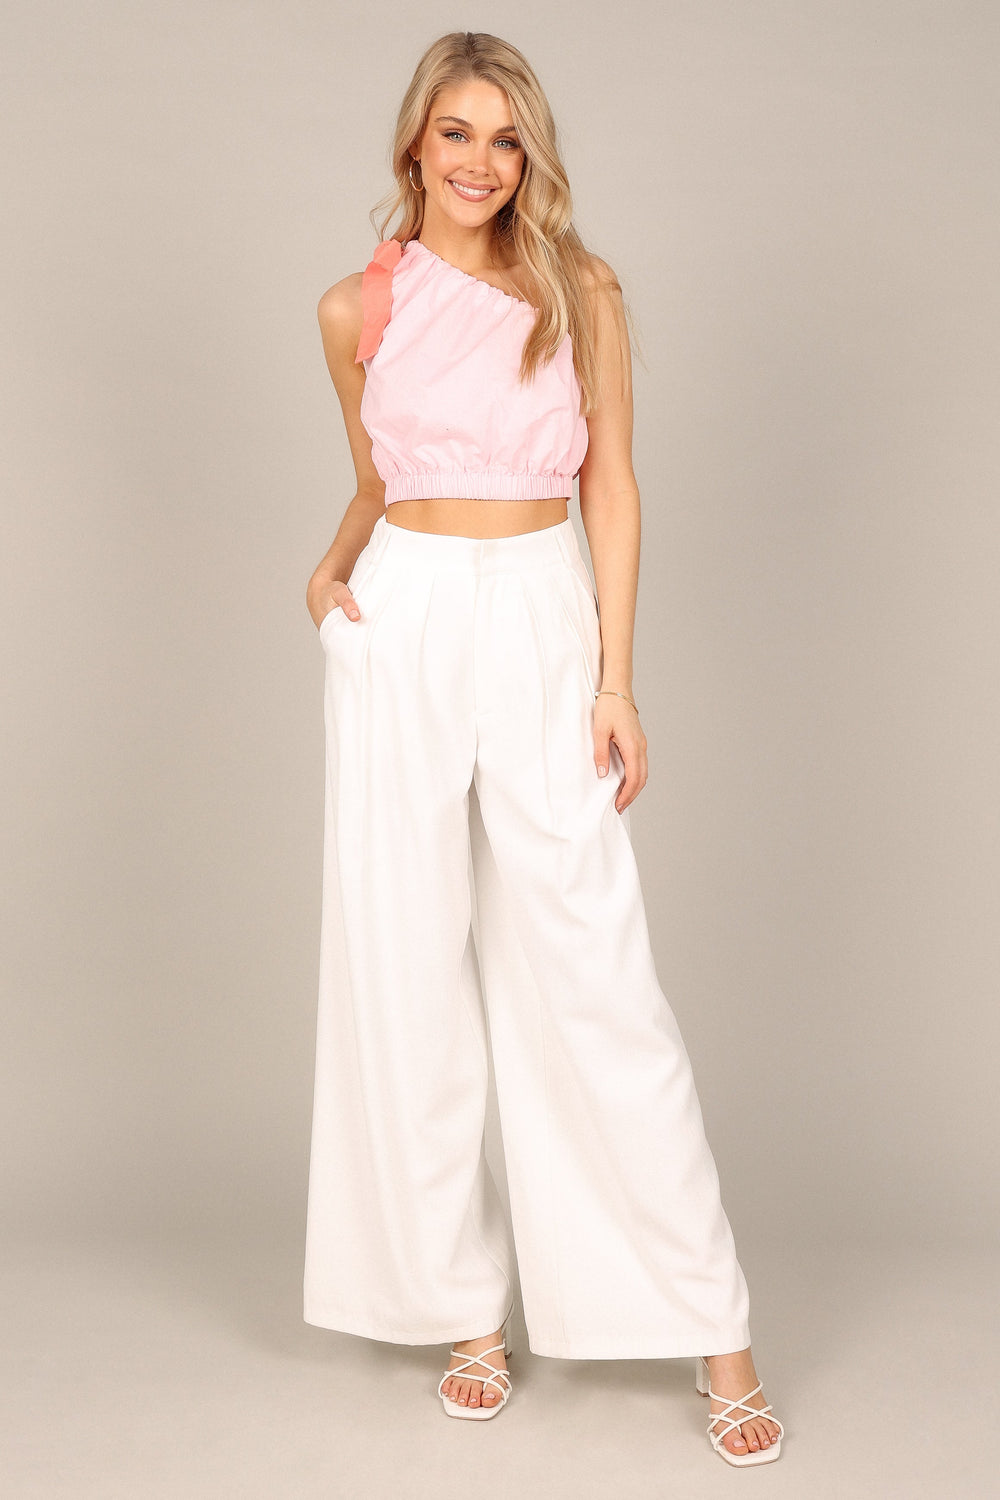 TOPS @Nelly One Shoulder Top - Pink